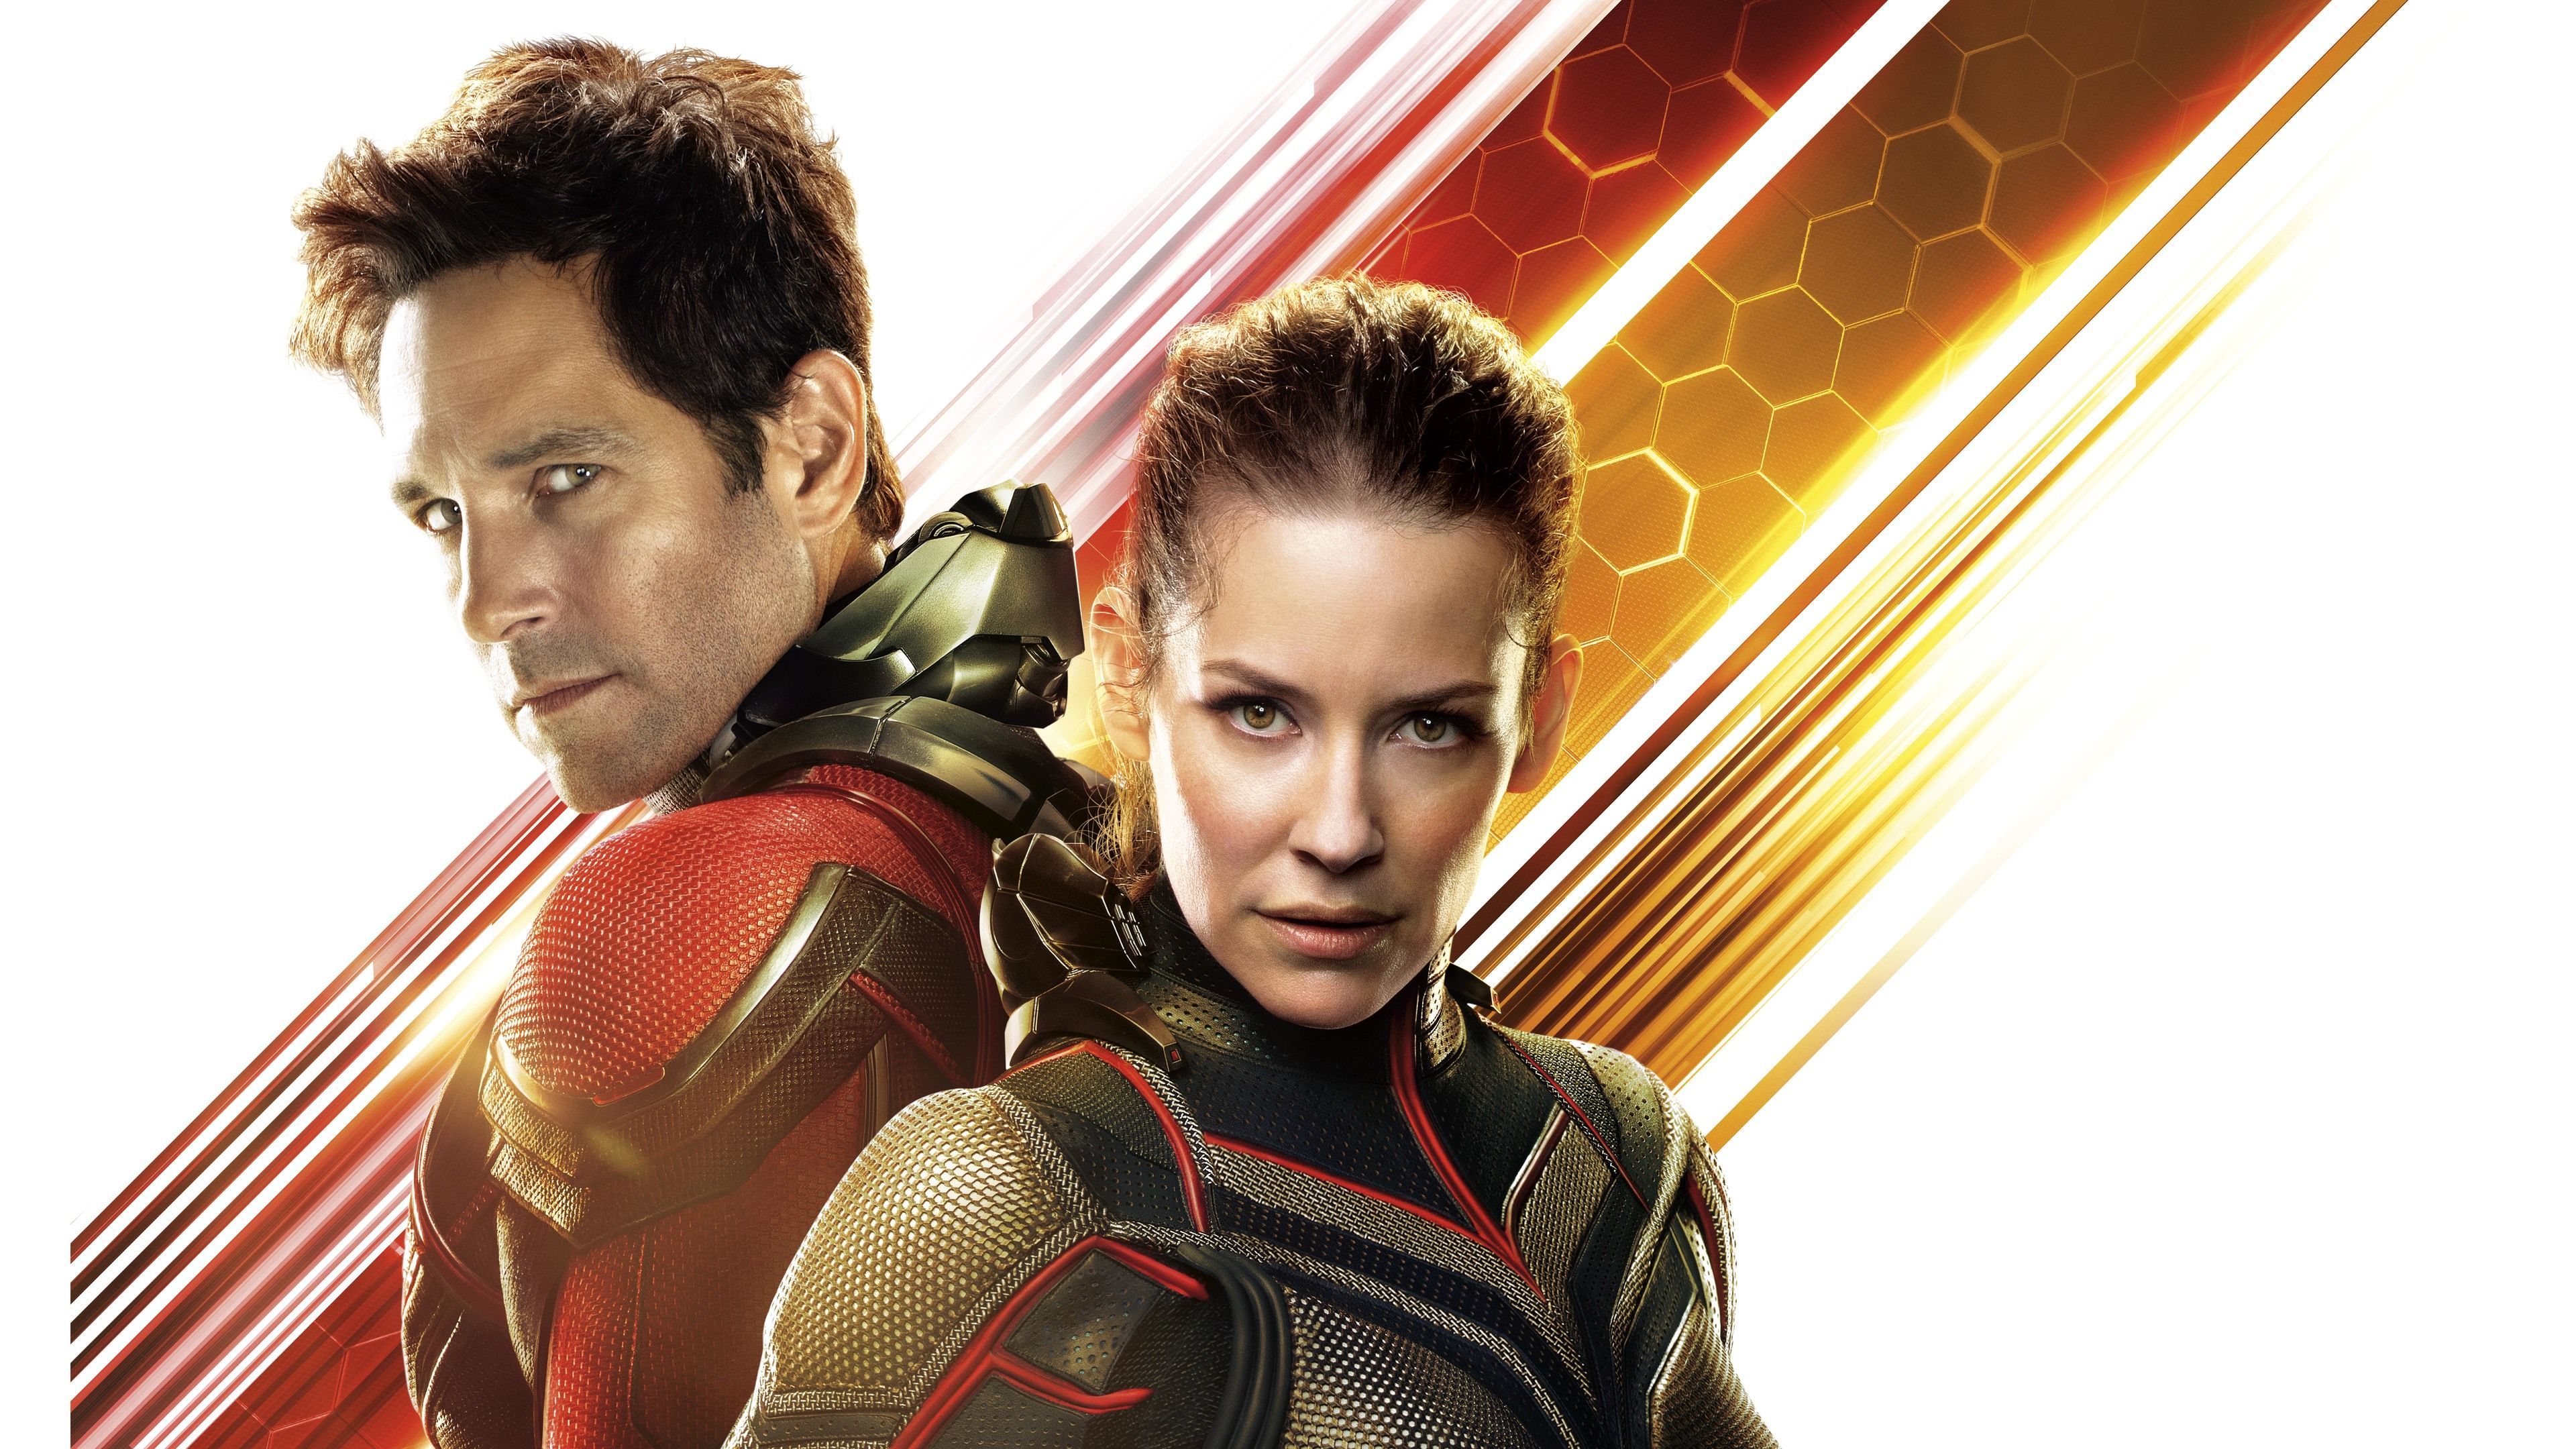 Ant Man And The Wasp Movie 4k Movies Wallpaper, Hd Wallpaper, Ant Man Wallpaper, Ant Man And The Wasp Wallpaper, 8k Wal. Wasp Movie, Movie Wallpaper, Ant Man